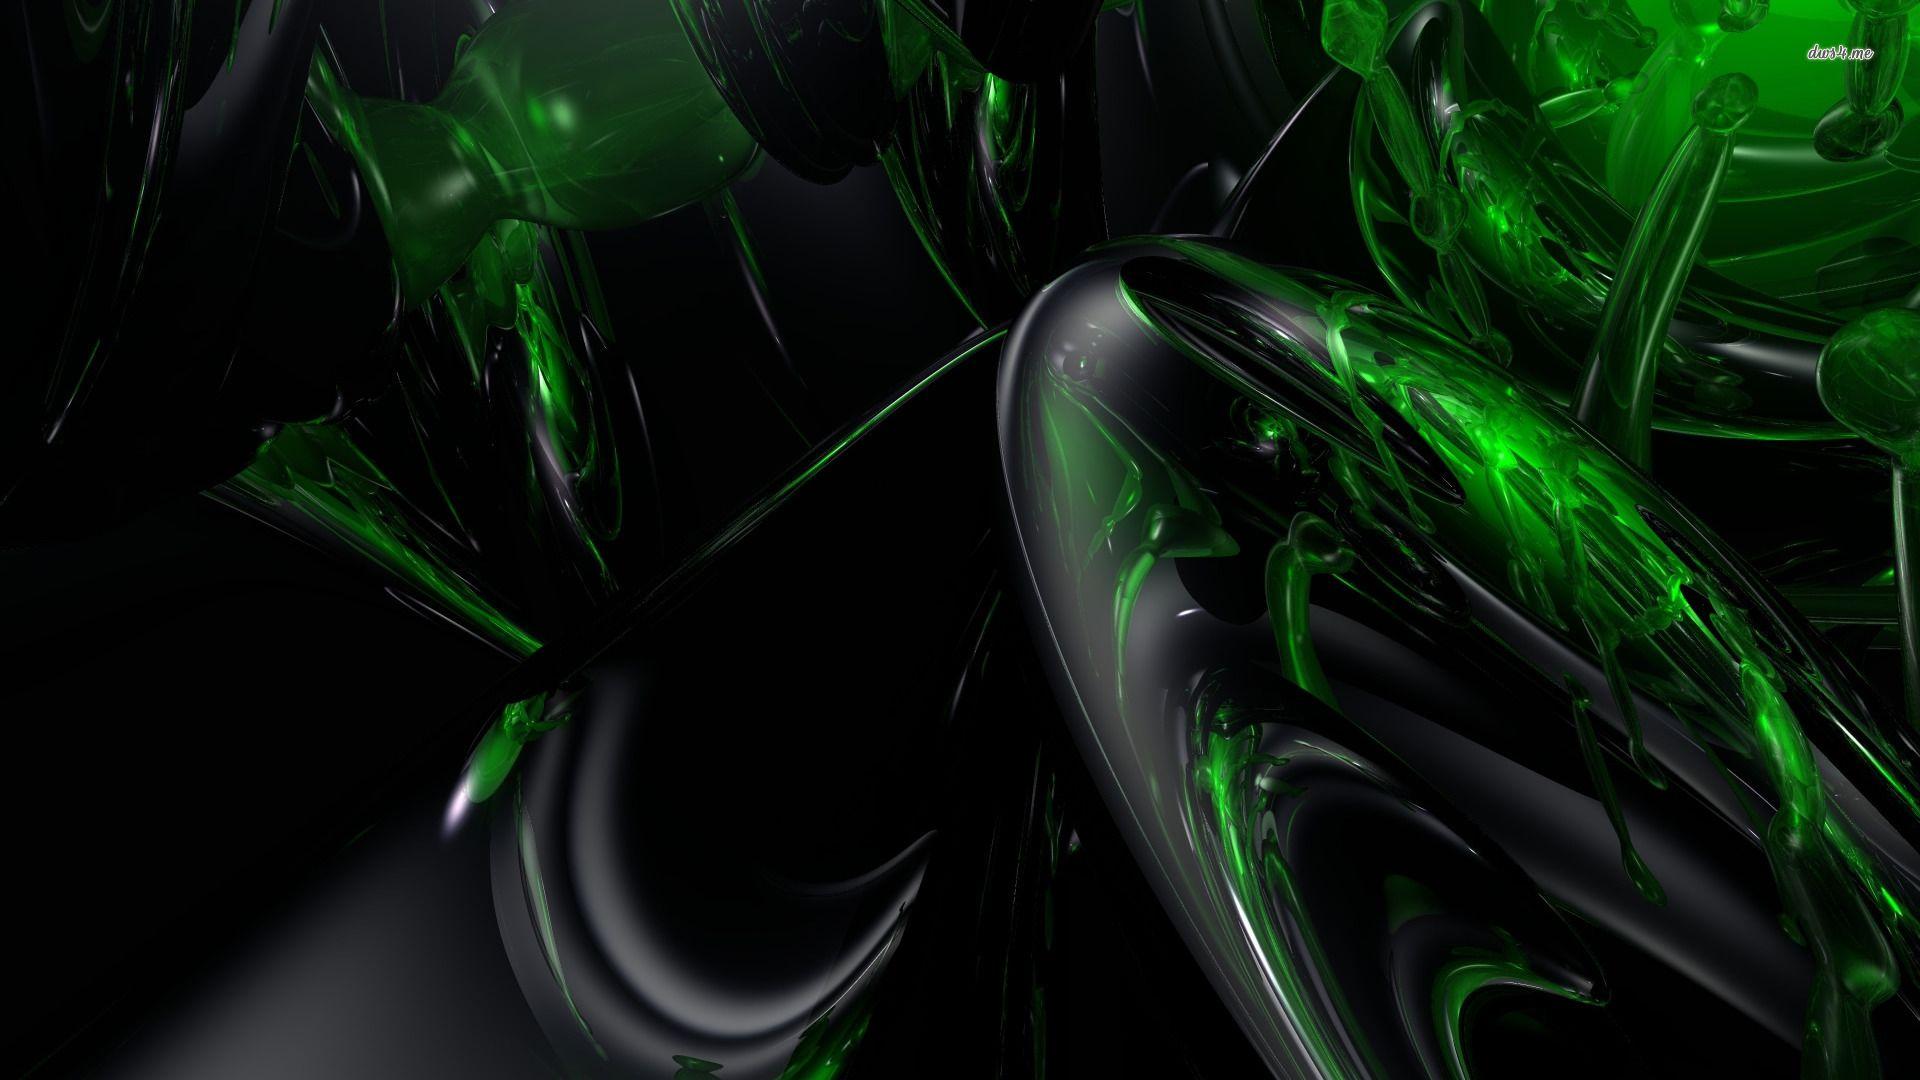 Black Abstract Wallpaper 1920x1080 HD Wallpaper, Background Image